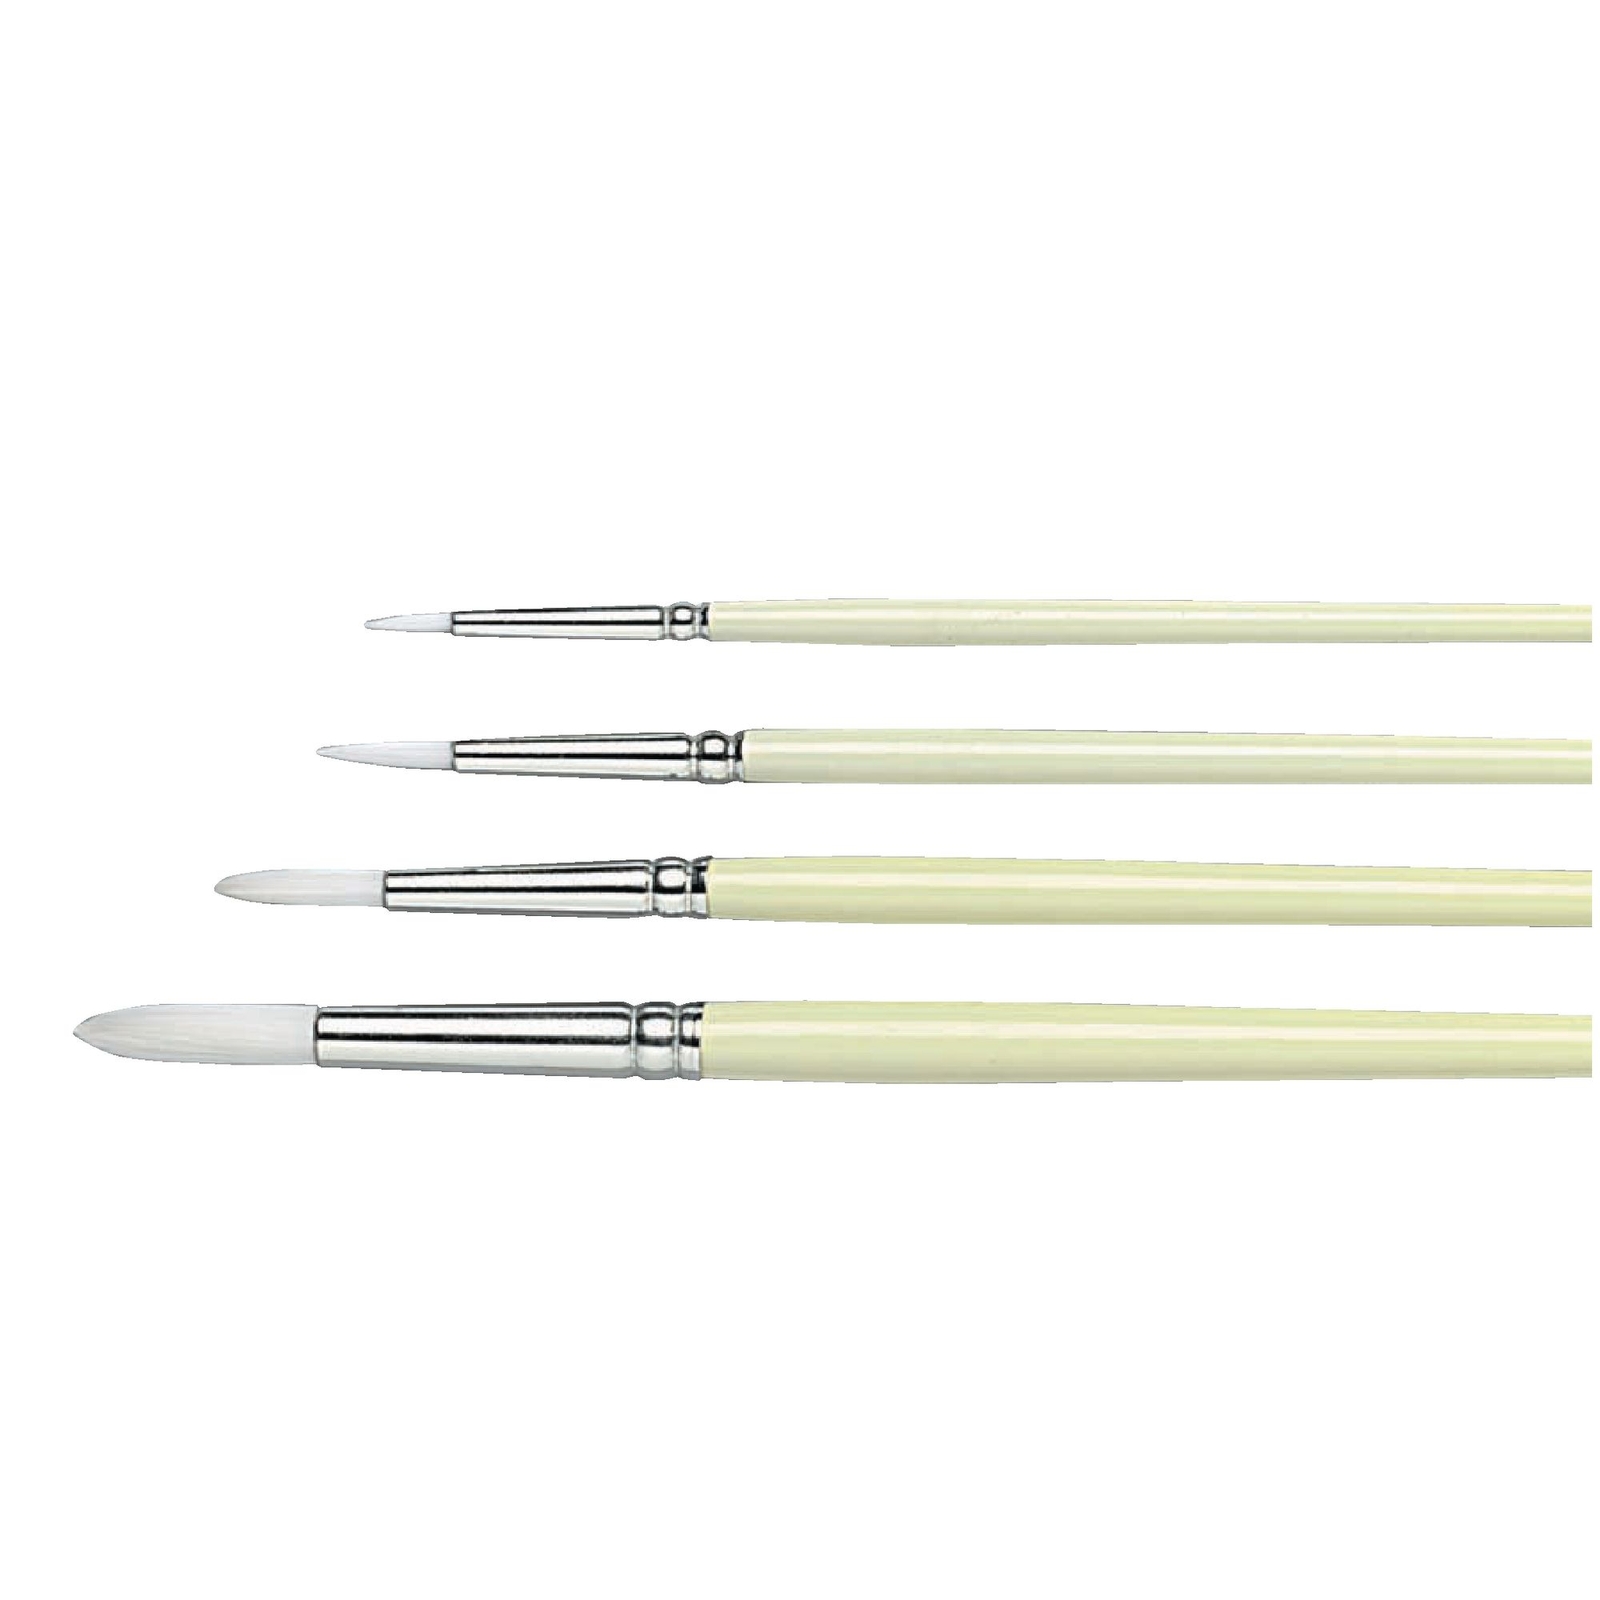 White Synthetic Sable Brushes - Size 4 class pack